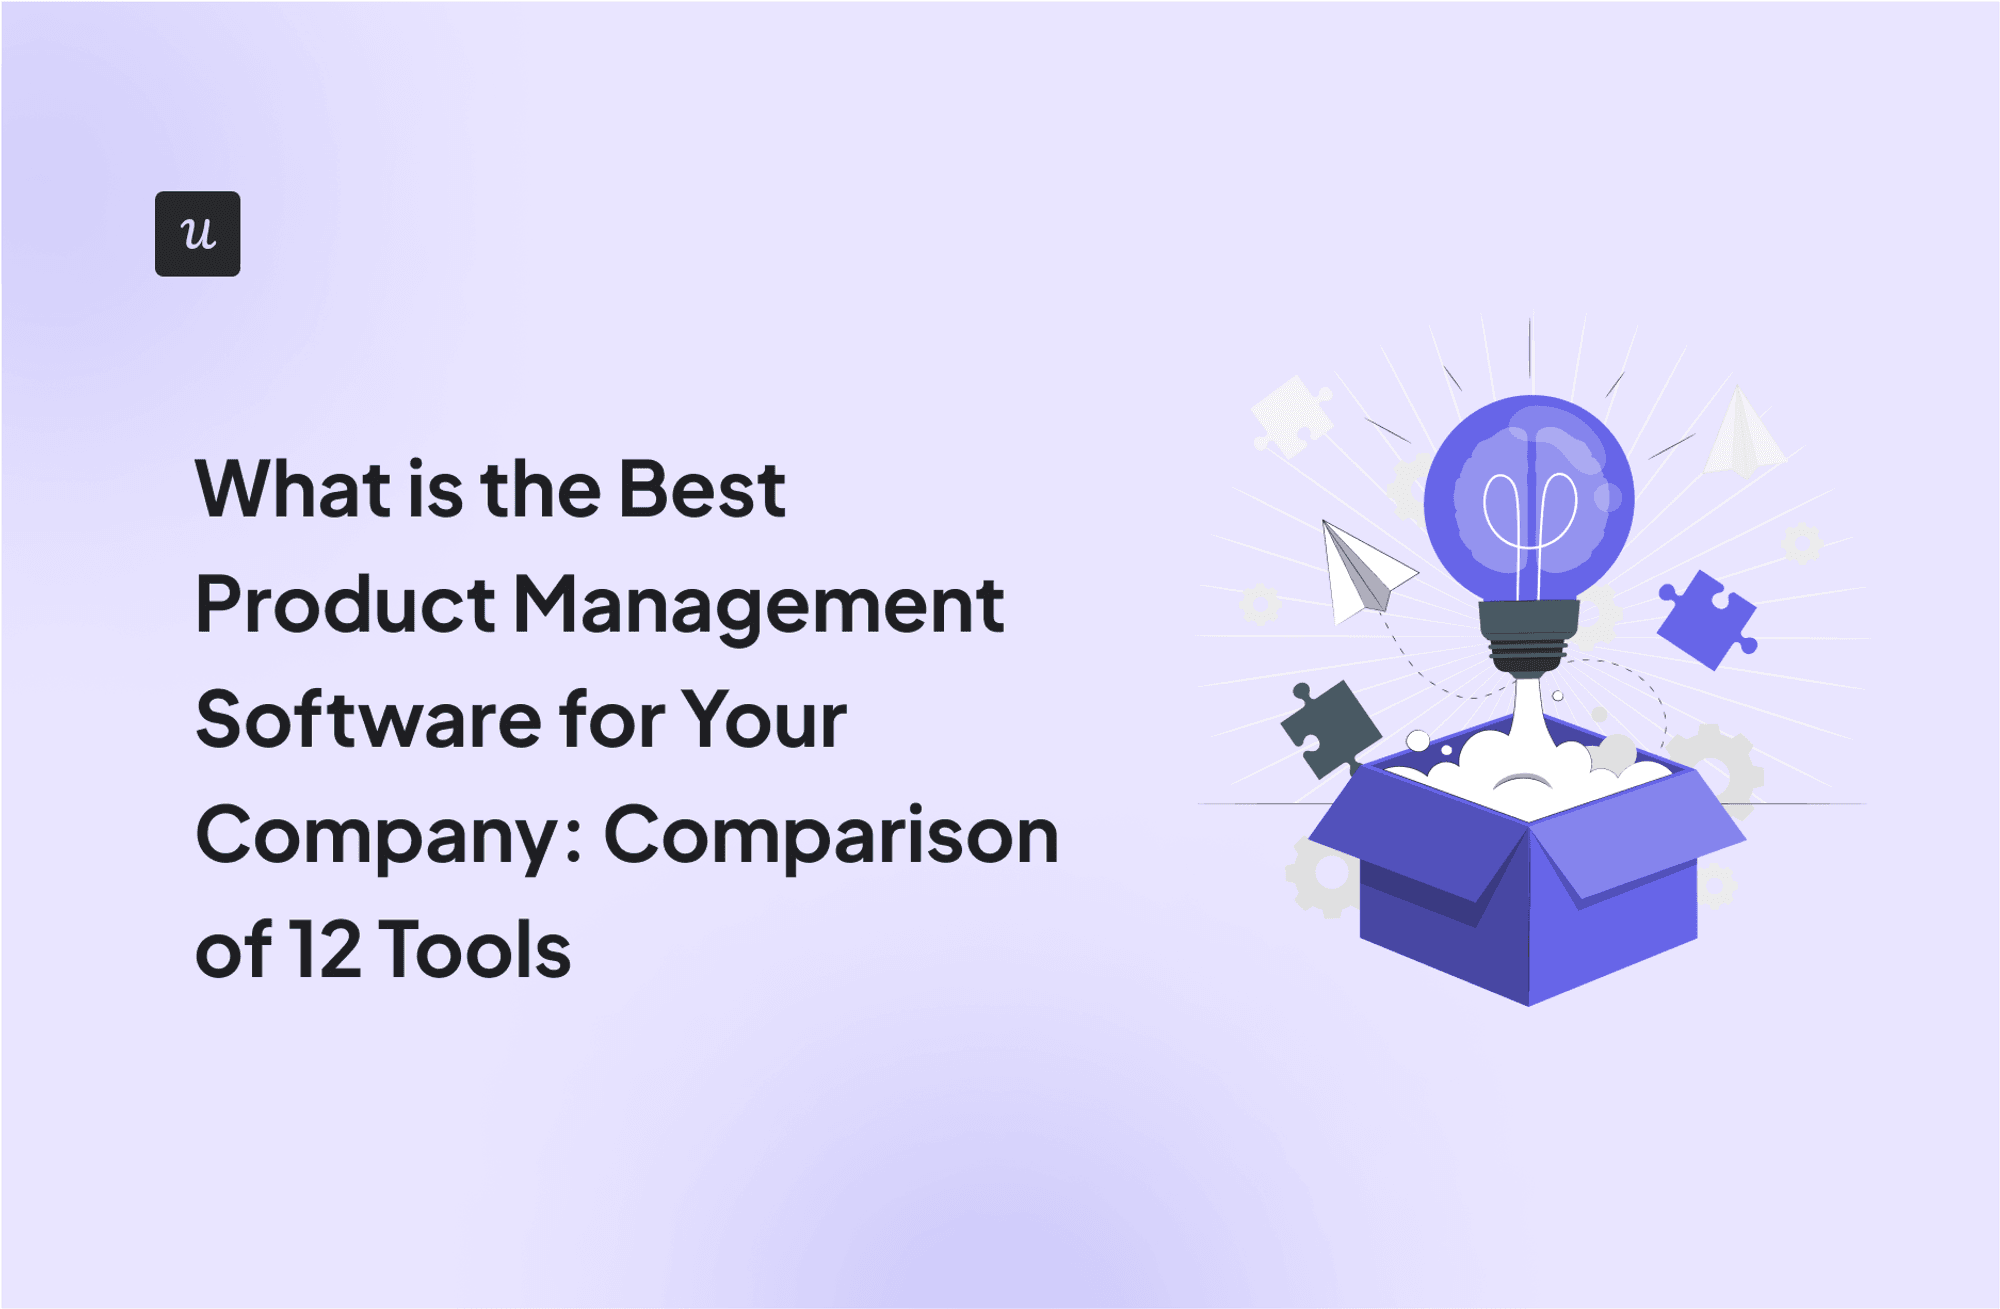 What is the Best Product Management Software for Your Company: Comparison of 12 Tools cover